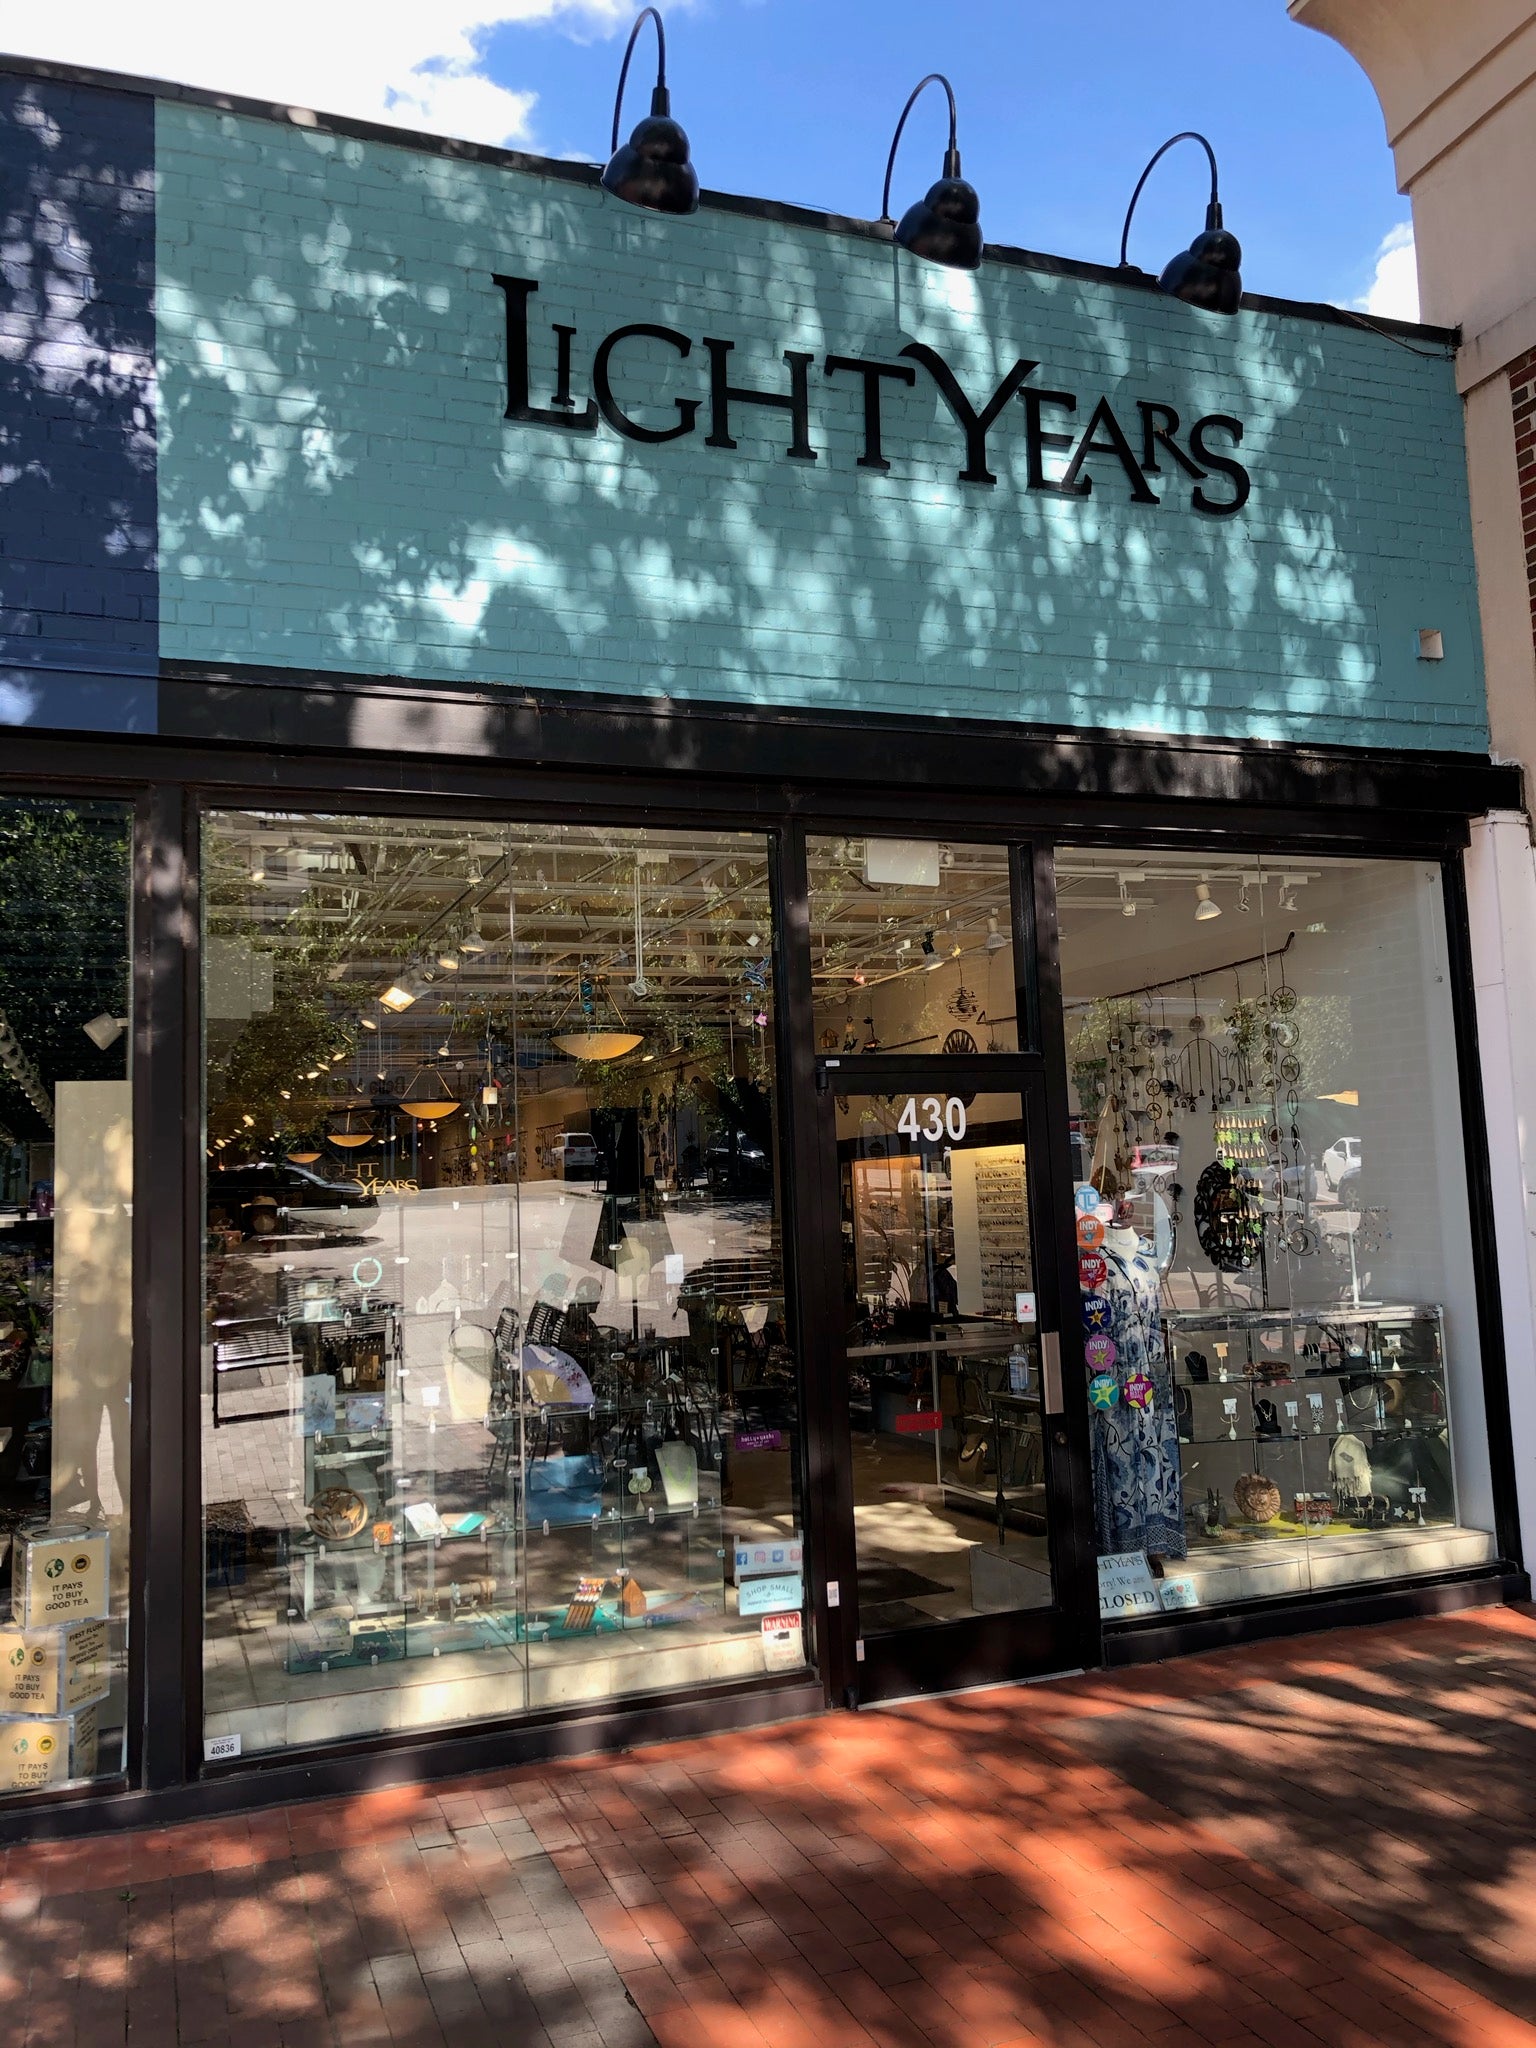 Image of the Light Years Jewelry store in Raleigh